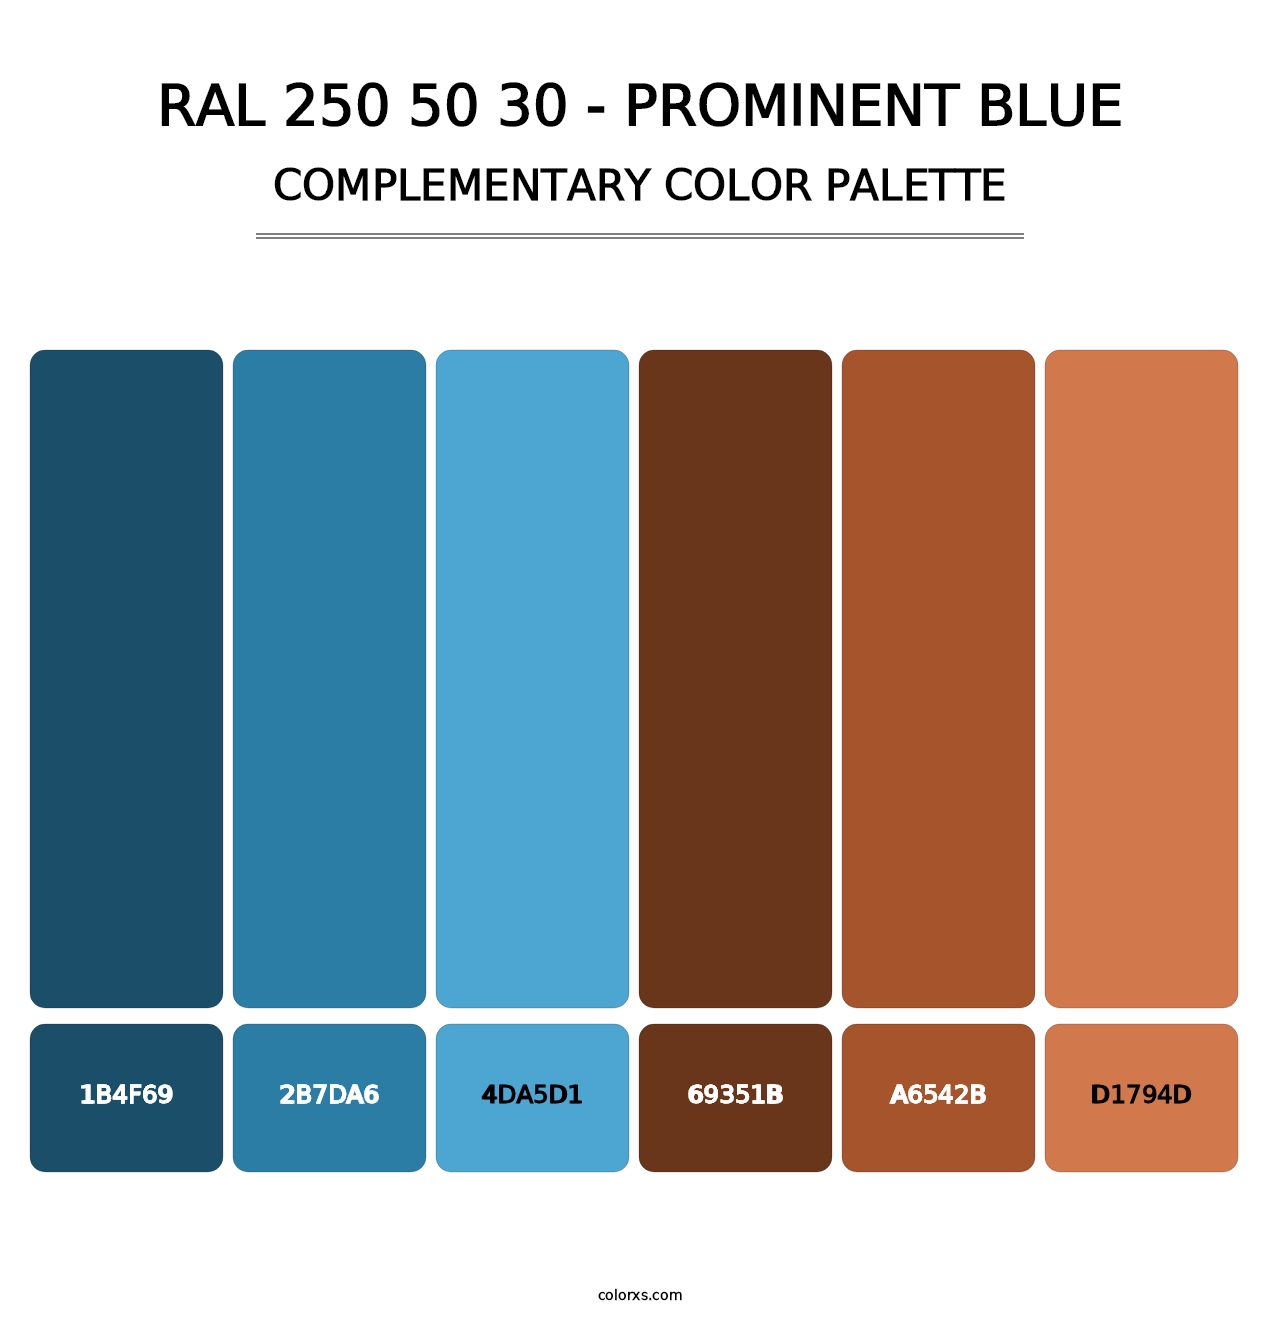 RAL 250 50 30 - Prominent Blue - Complementary Color Palette